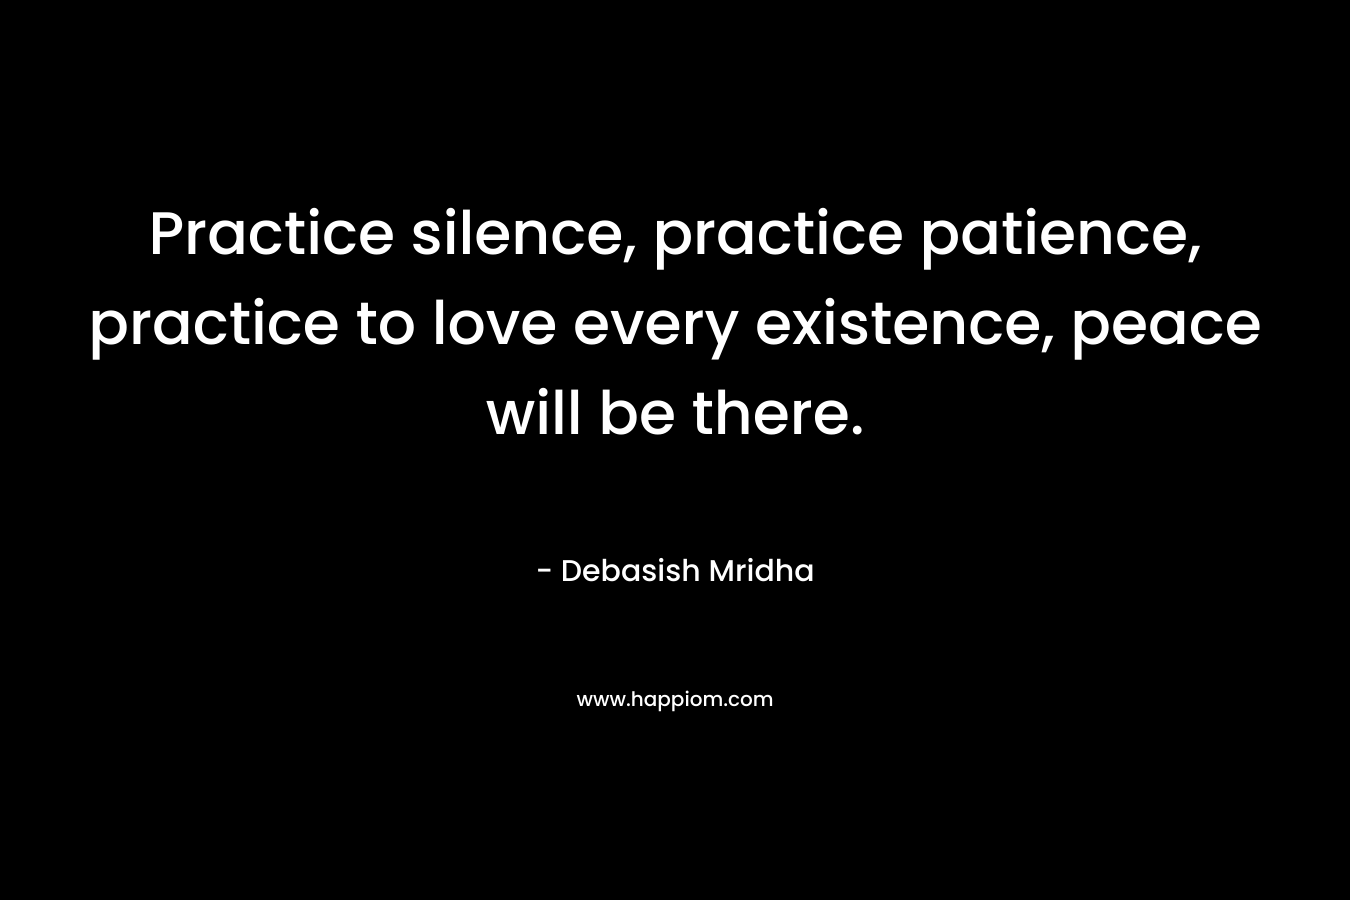 Practice silence, practice patience, practice to love every existence, peace will be there.